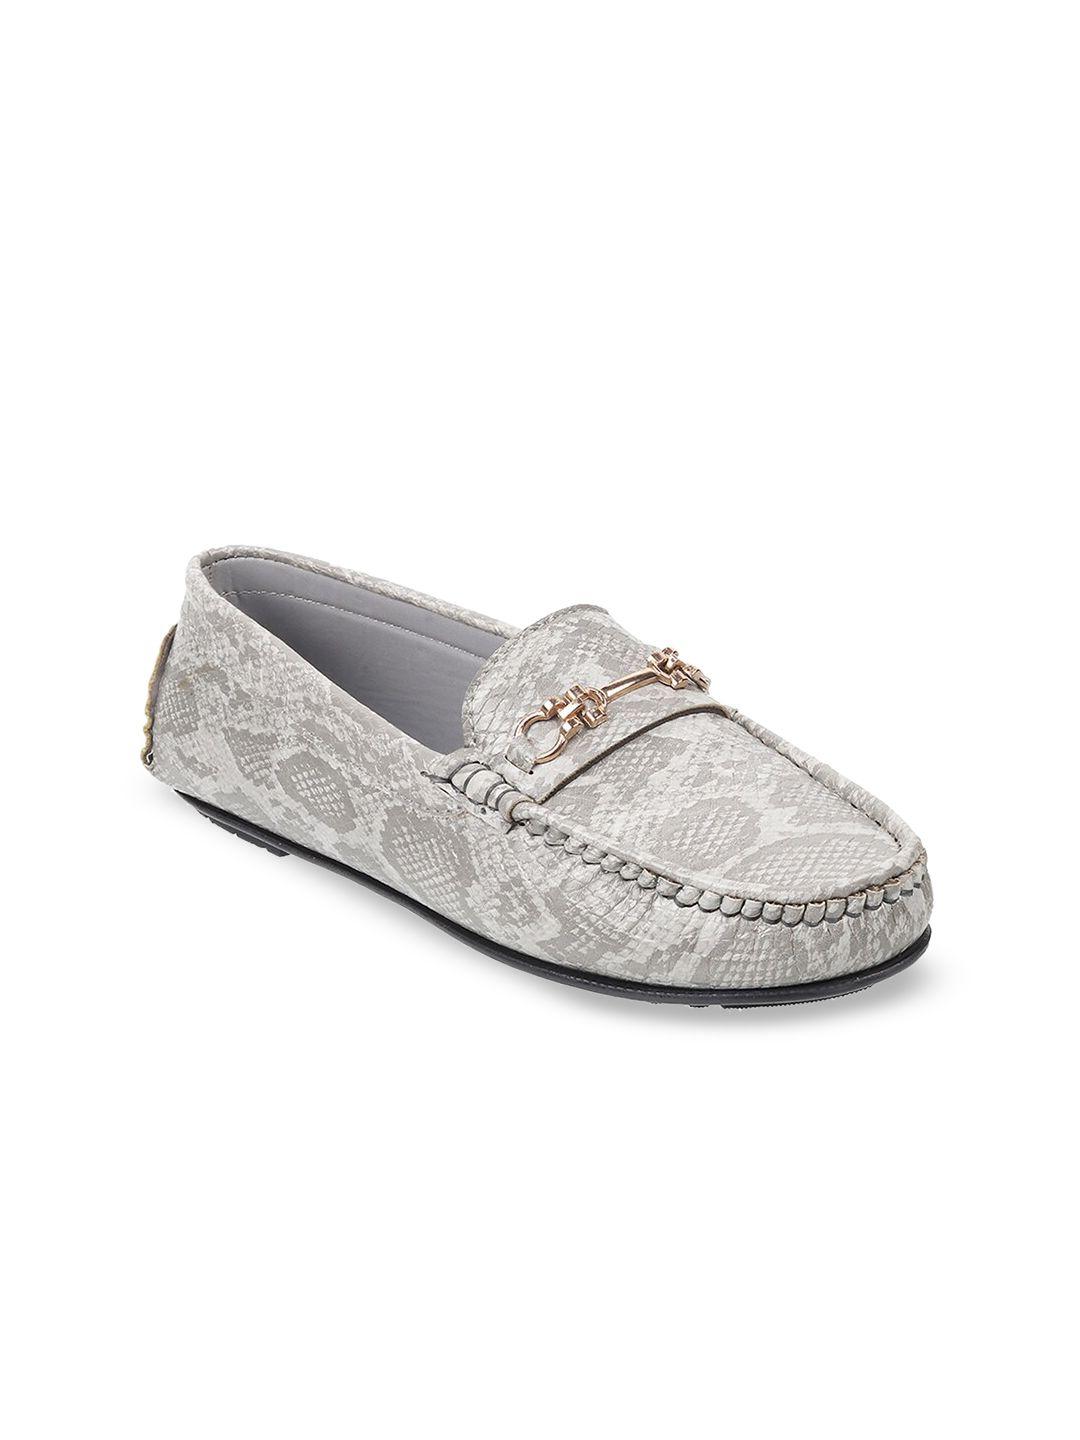 mochi-women-printed-loafers